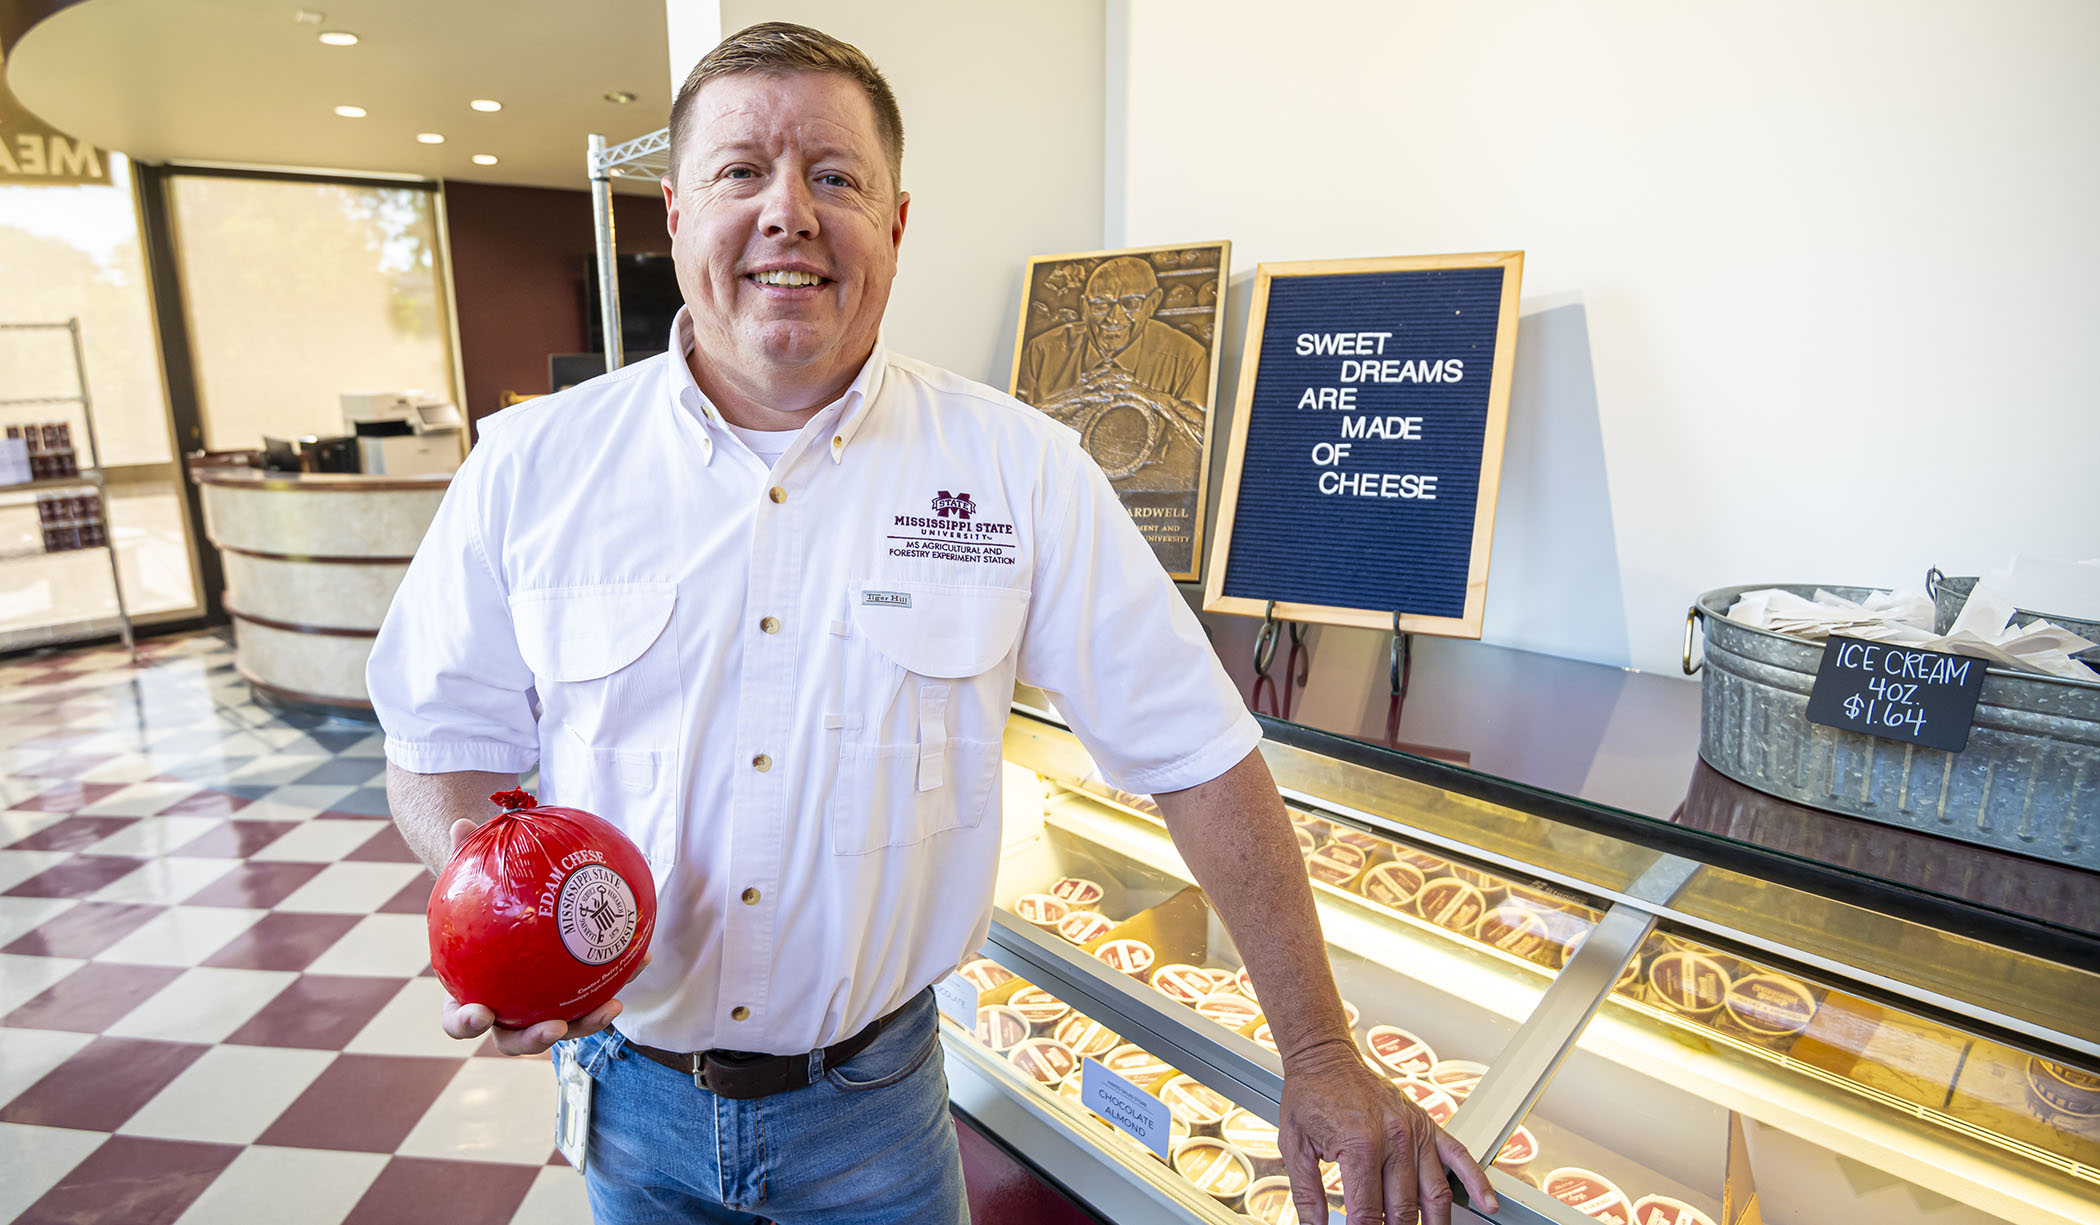 Jay McClelland, pictured holding a ball of Edam cheese.